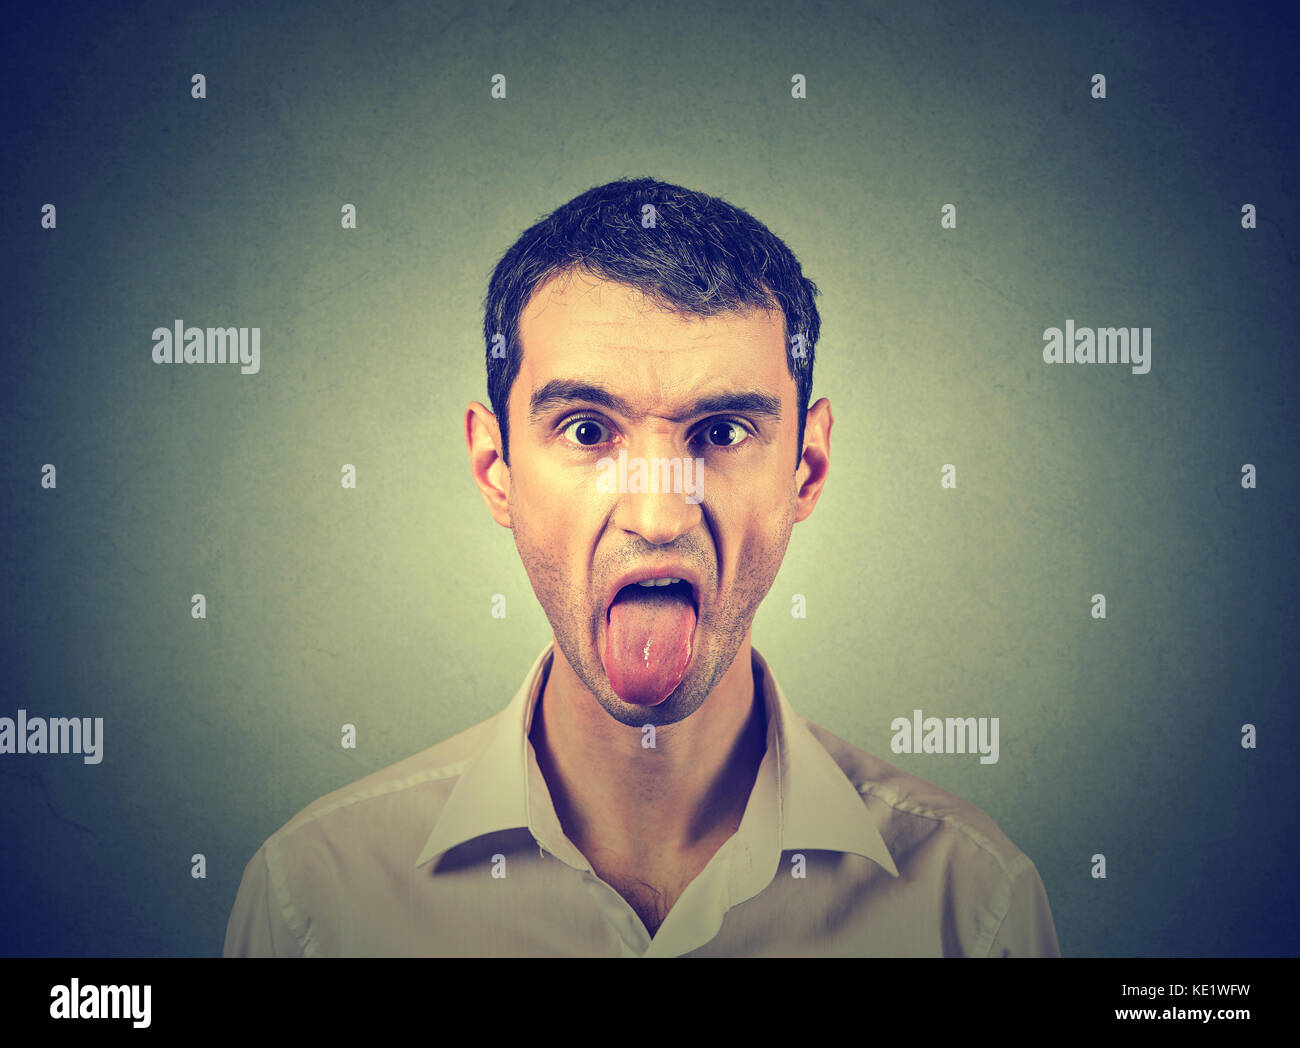 portrait of young man sticking out his tongue Stock Photo